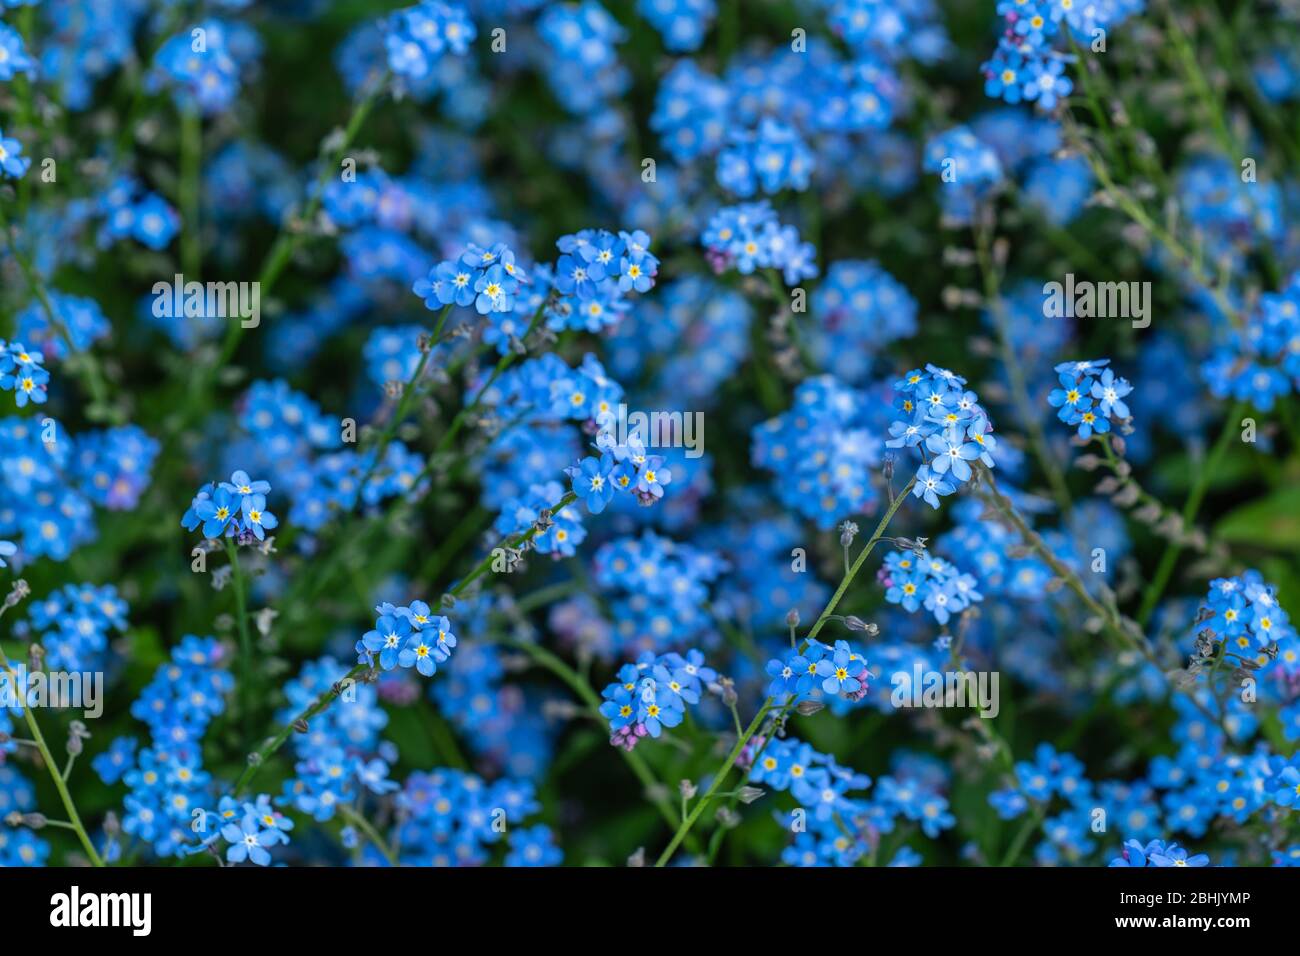 Myosotis is a genus of flowering plants in the family Boraginaceae. In the northern hemisphere they are colloquially denominated forget-me-nots or Stock Photo